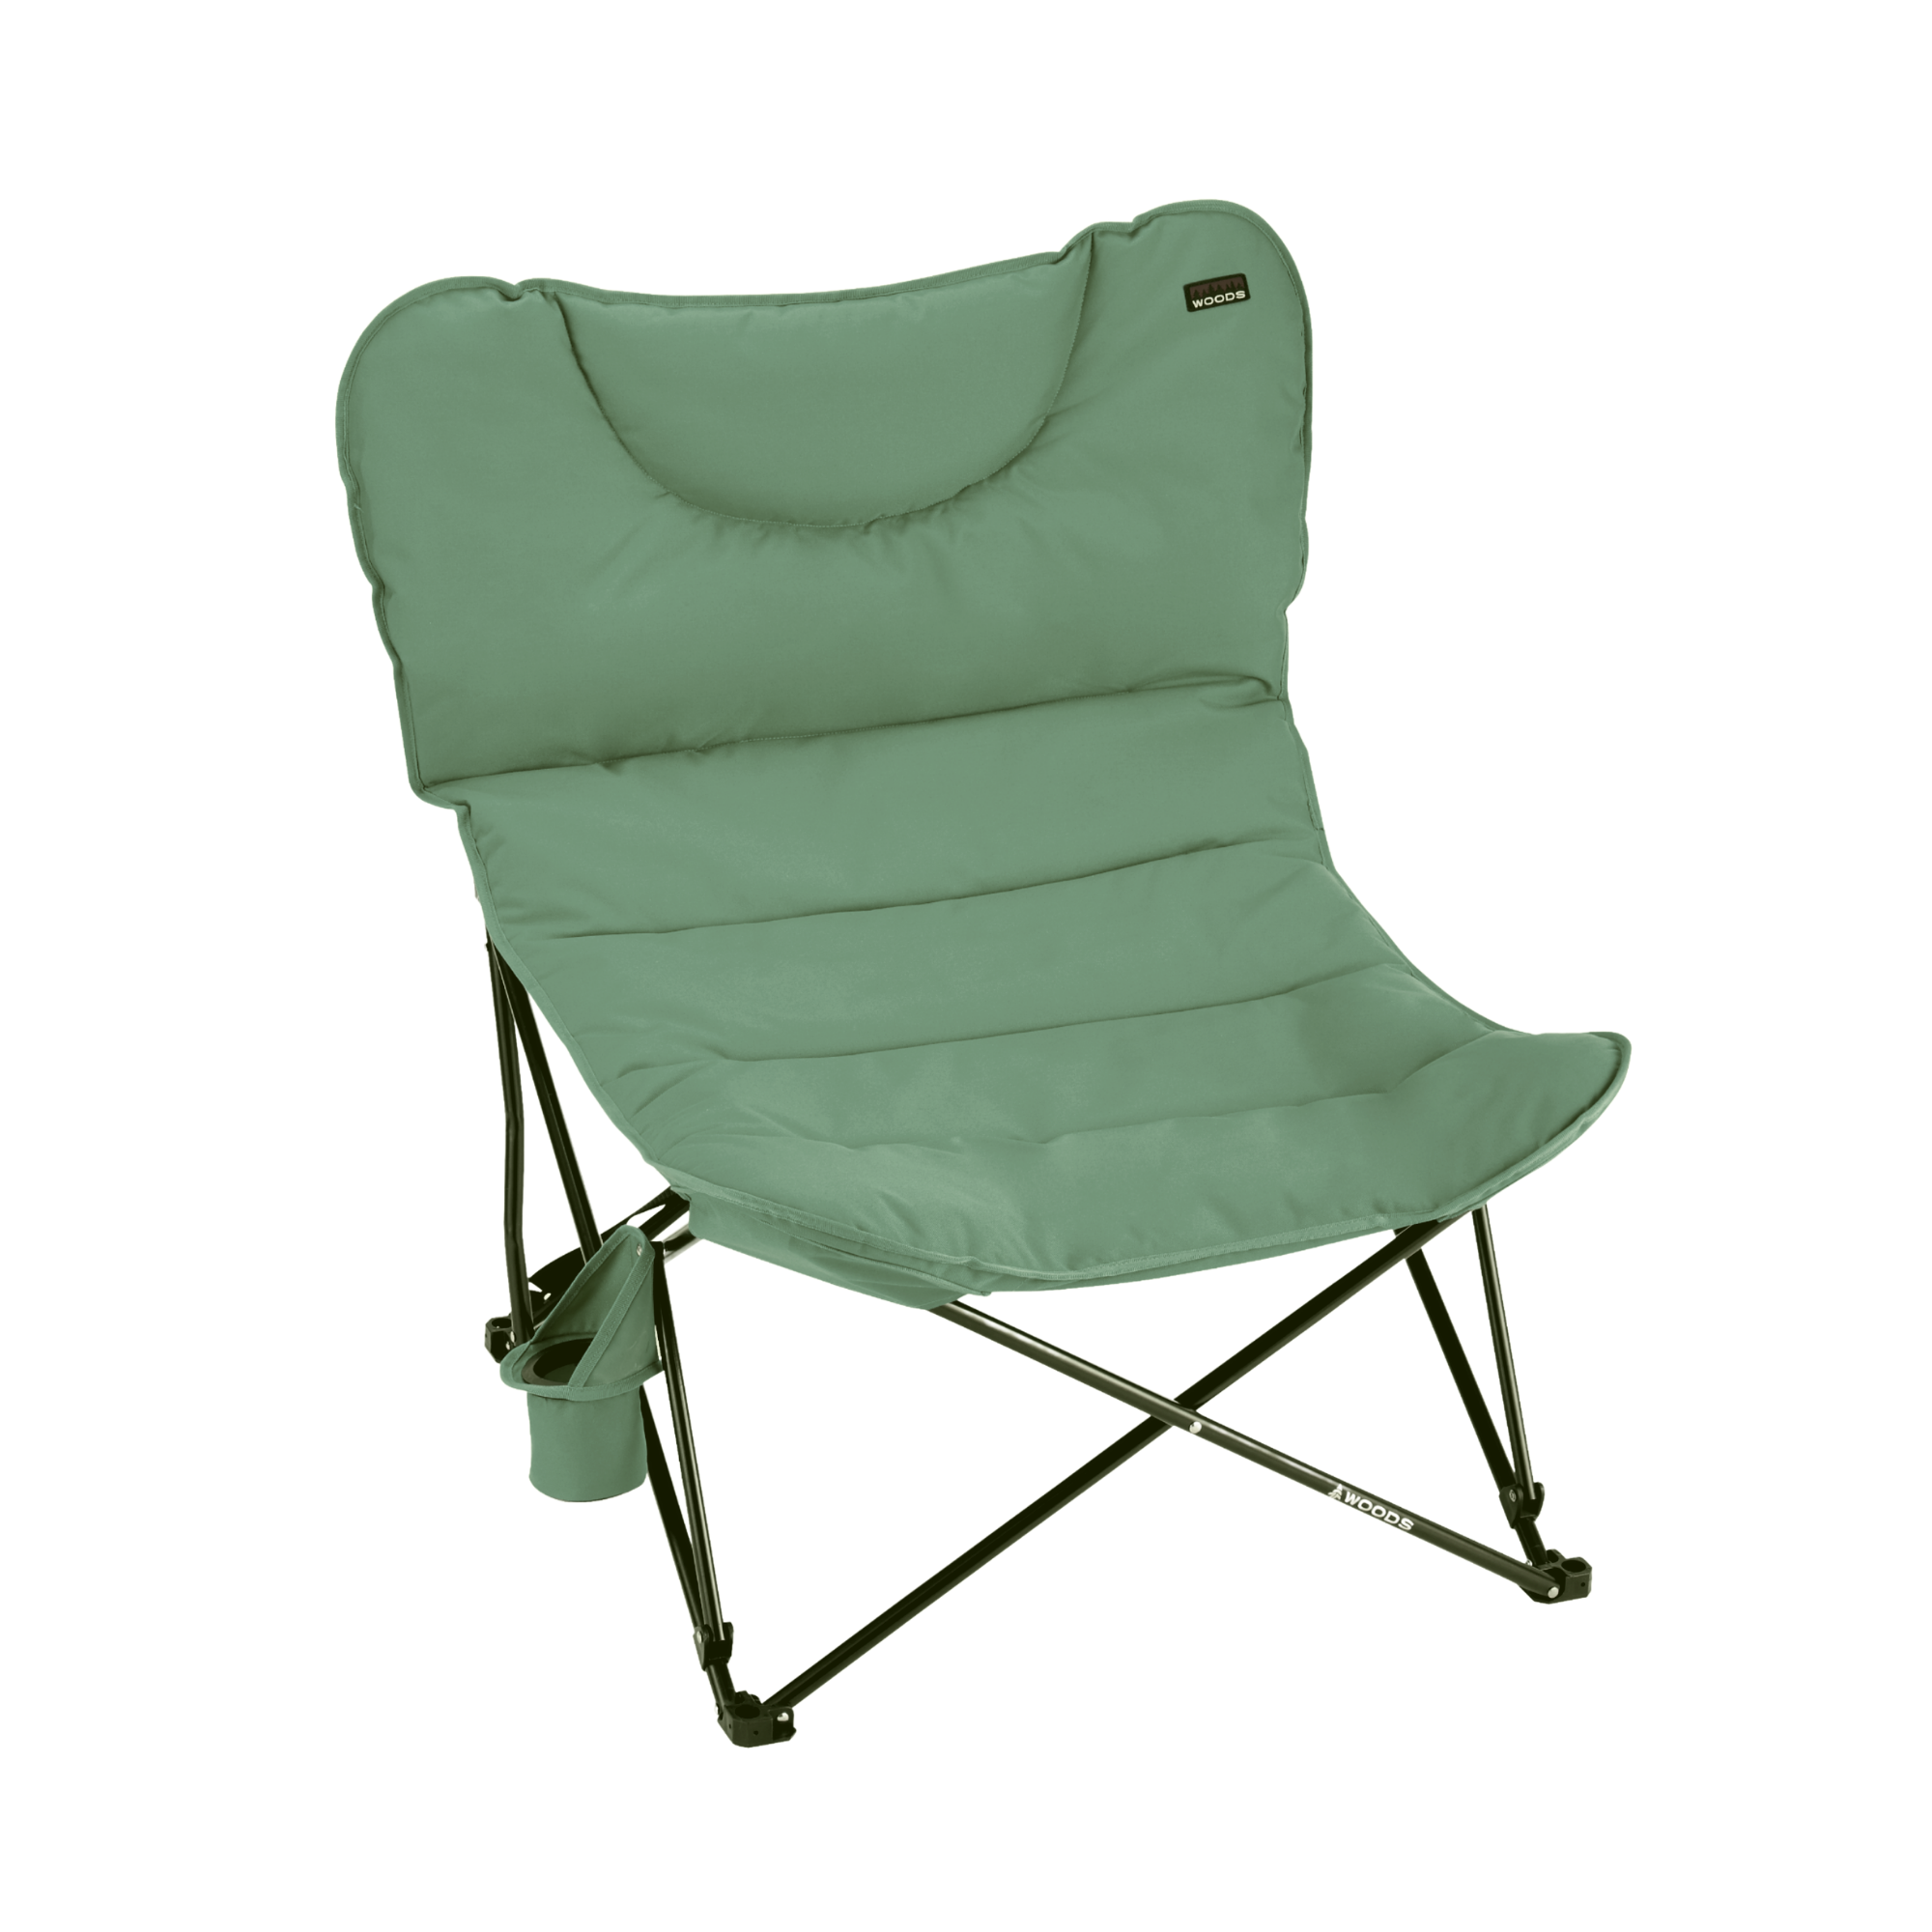 Camping Chairs Folding 